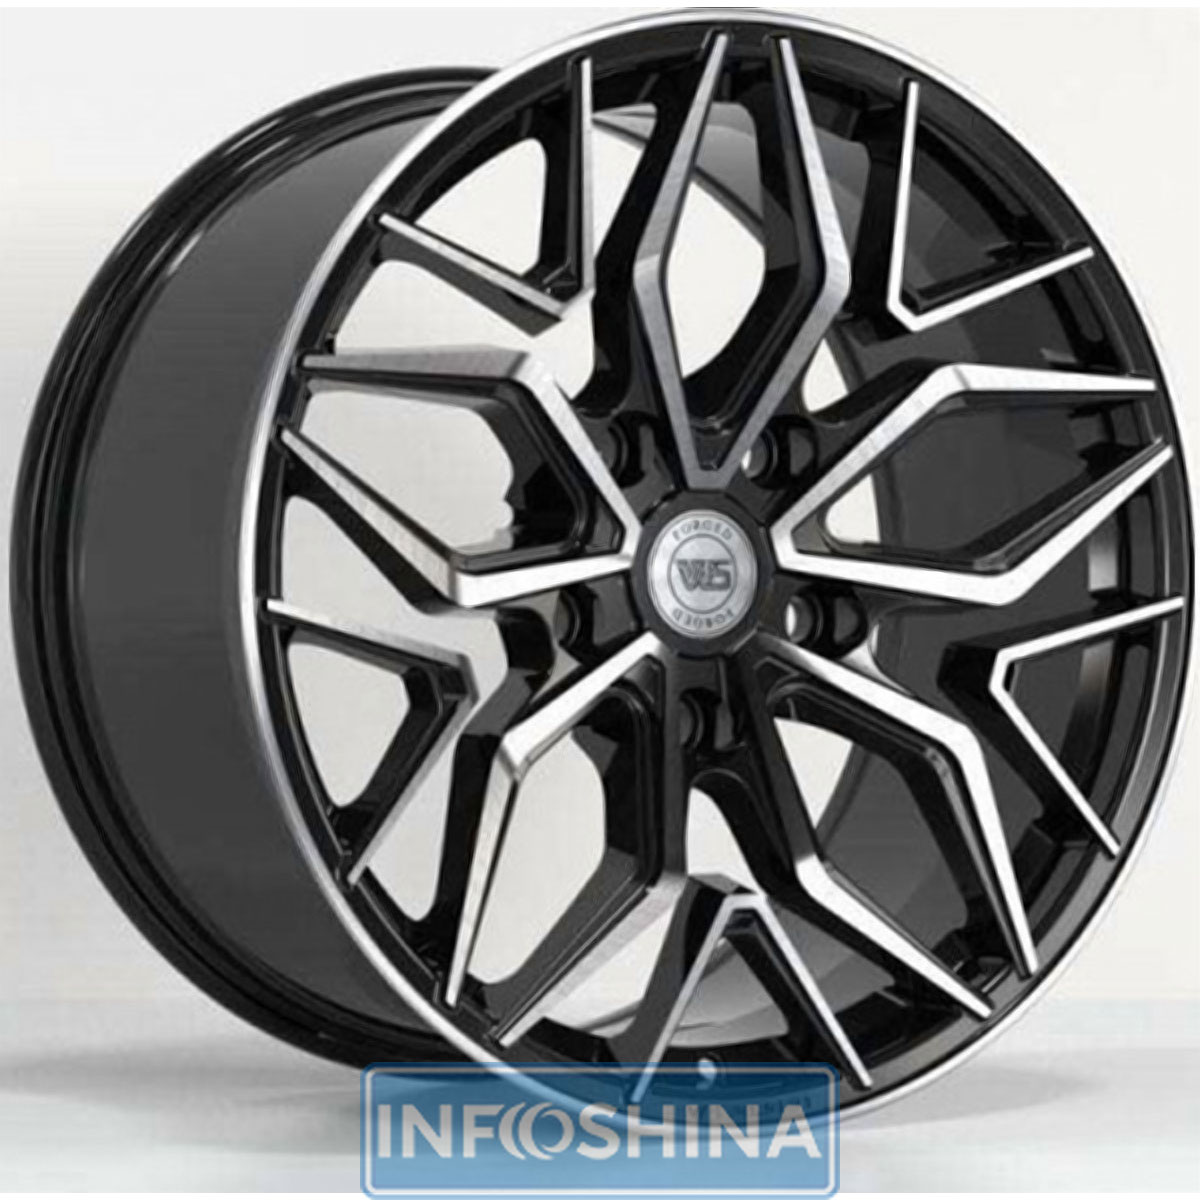 Купить диски WS Forged WS2154 Gloss Black With Machined Face R20 W10 PCD5x150 ET45 DIA110.1